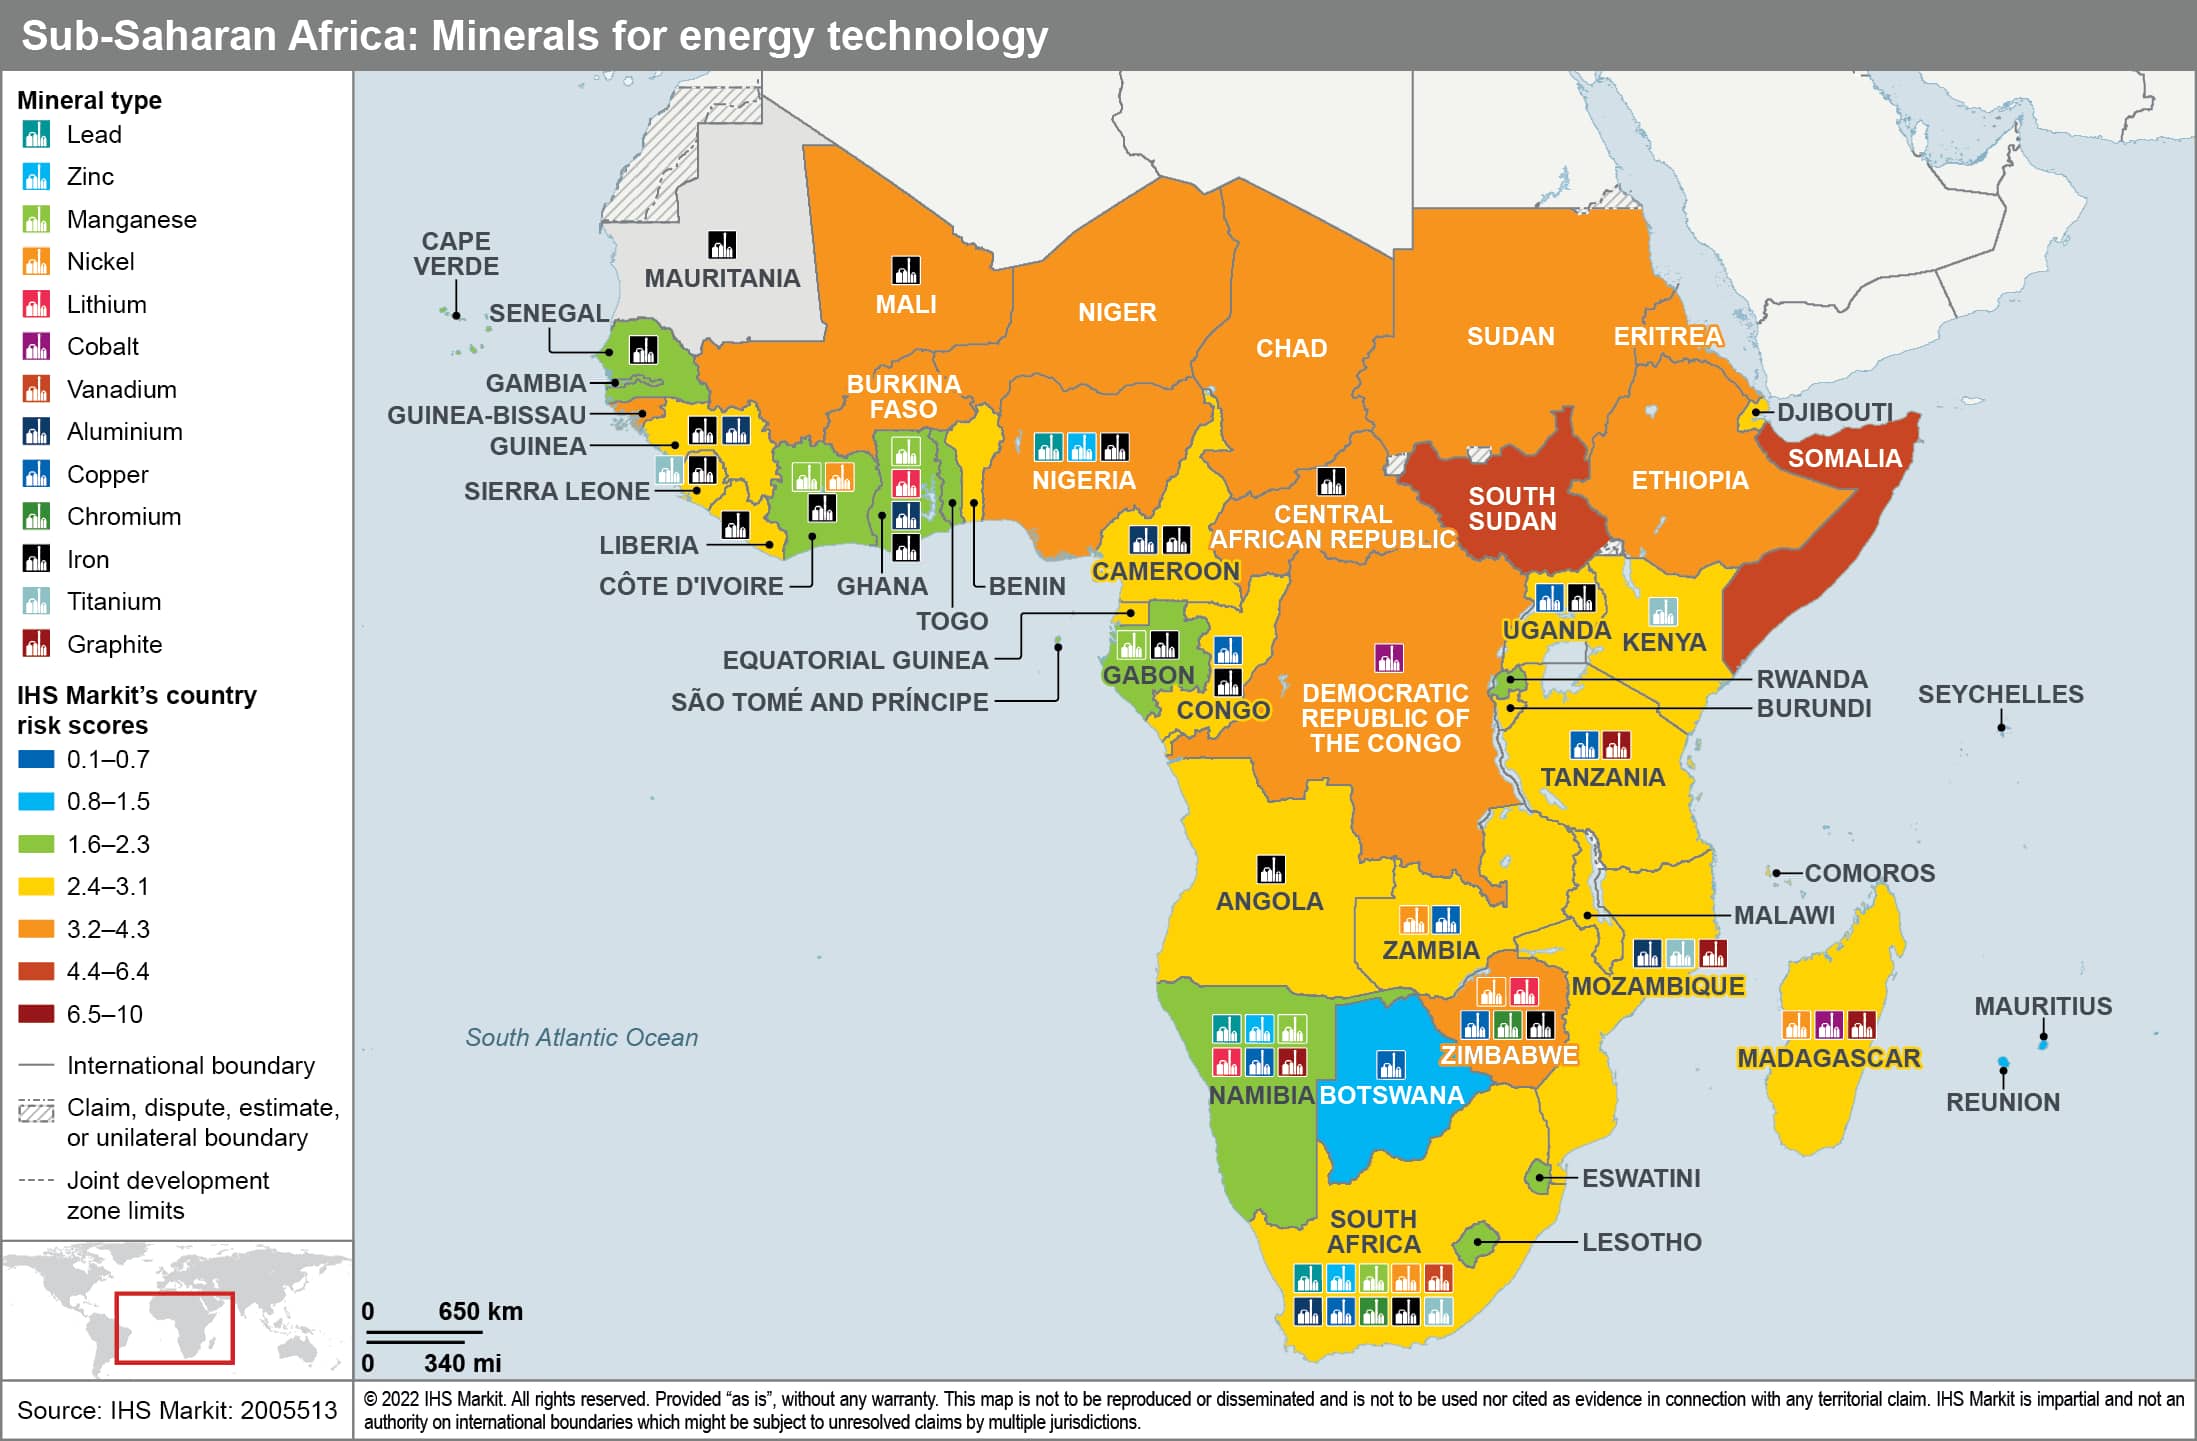 Map SSA mineral technology and critical metals and minerals for energy transition